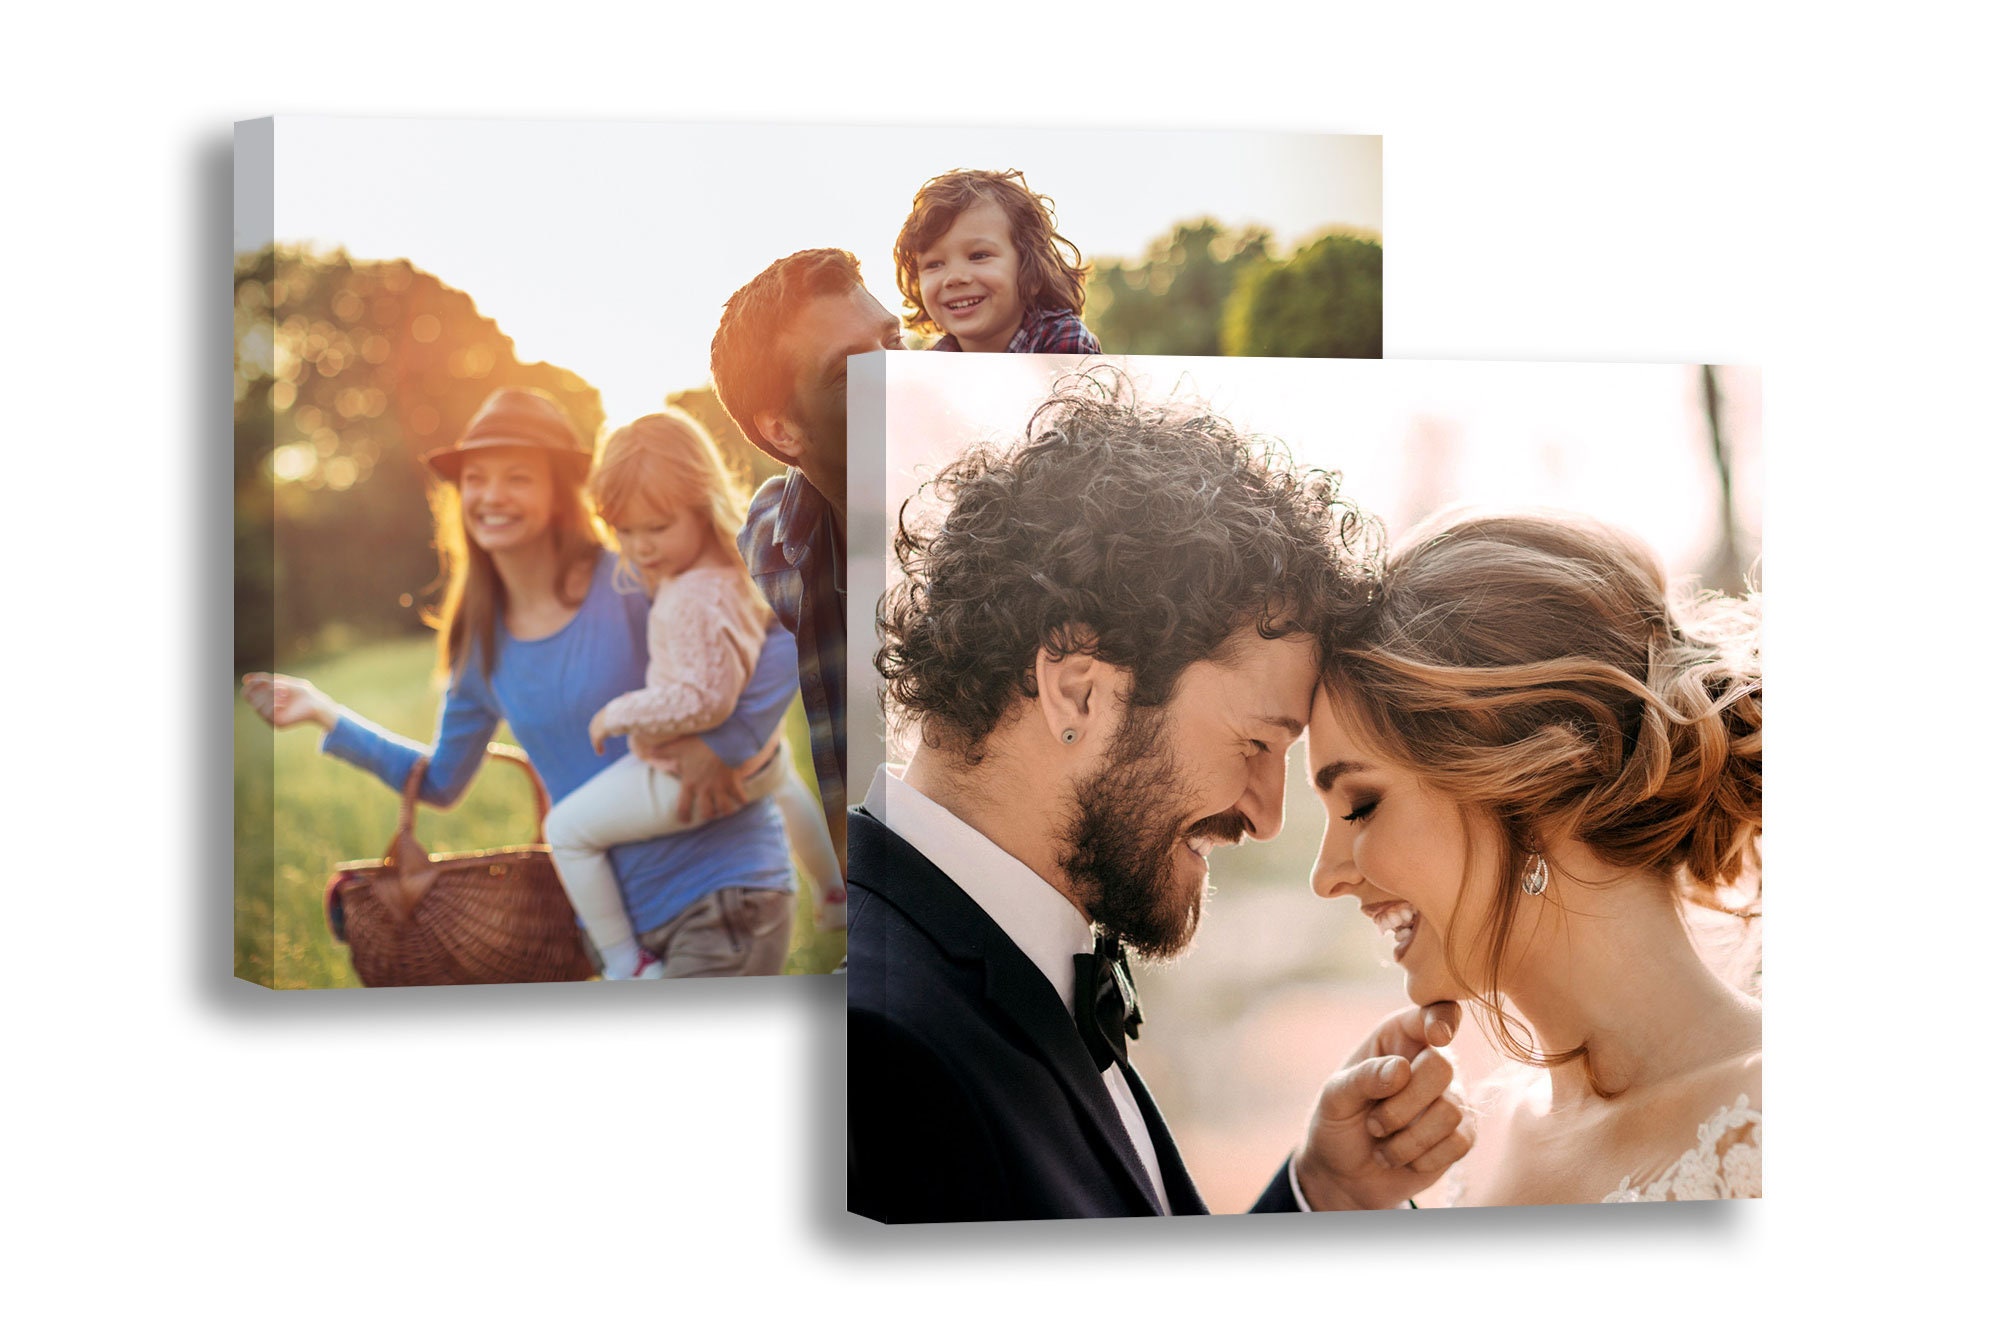 Custom Canvas Prints with Your Photos - Personalized Photo Gifts Framed Canvas Wall Art - Floating Frames & Gift Wrapping Available (8 Wx6 H)